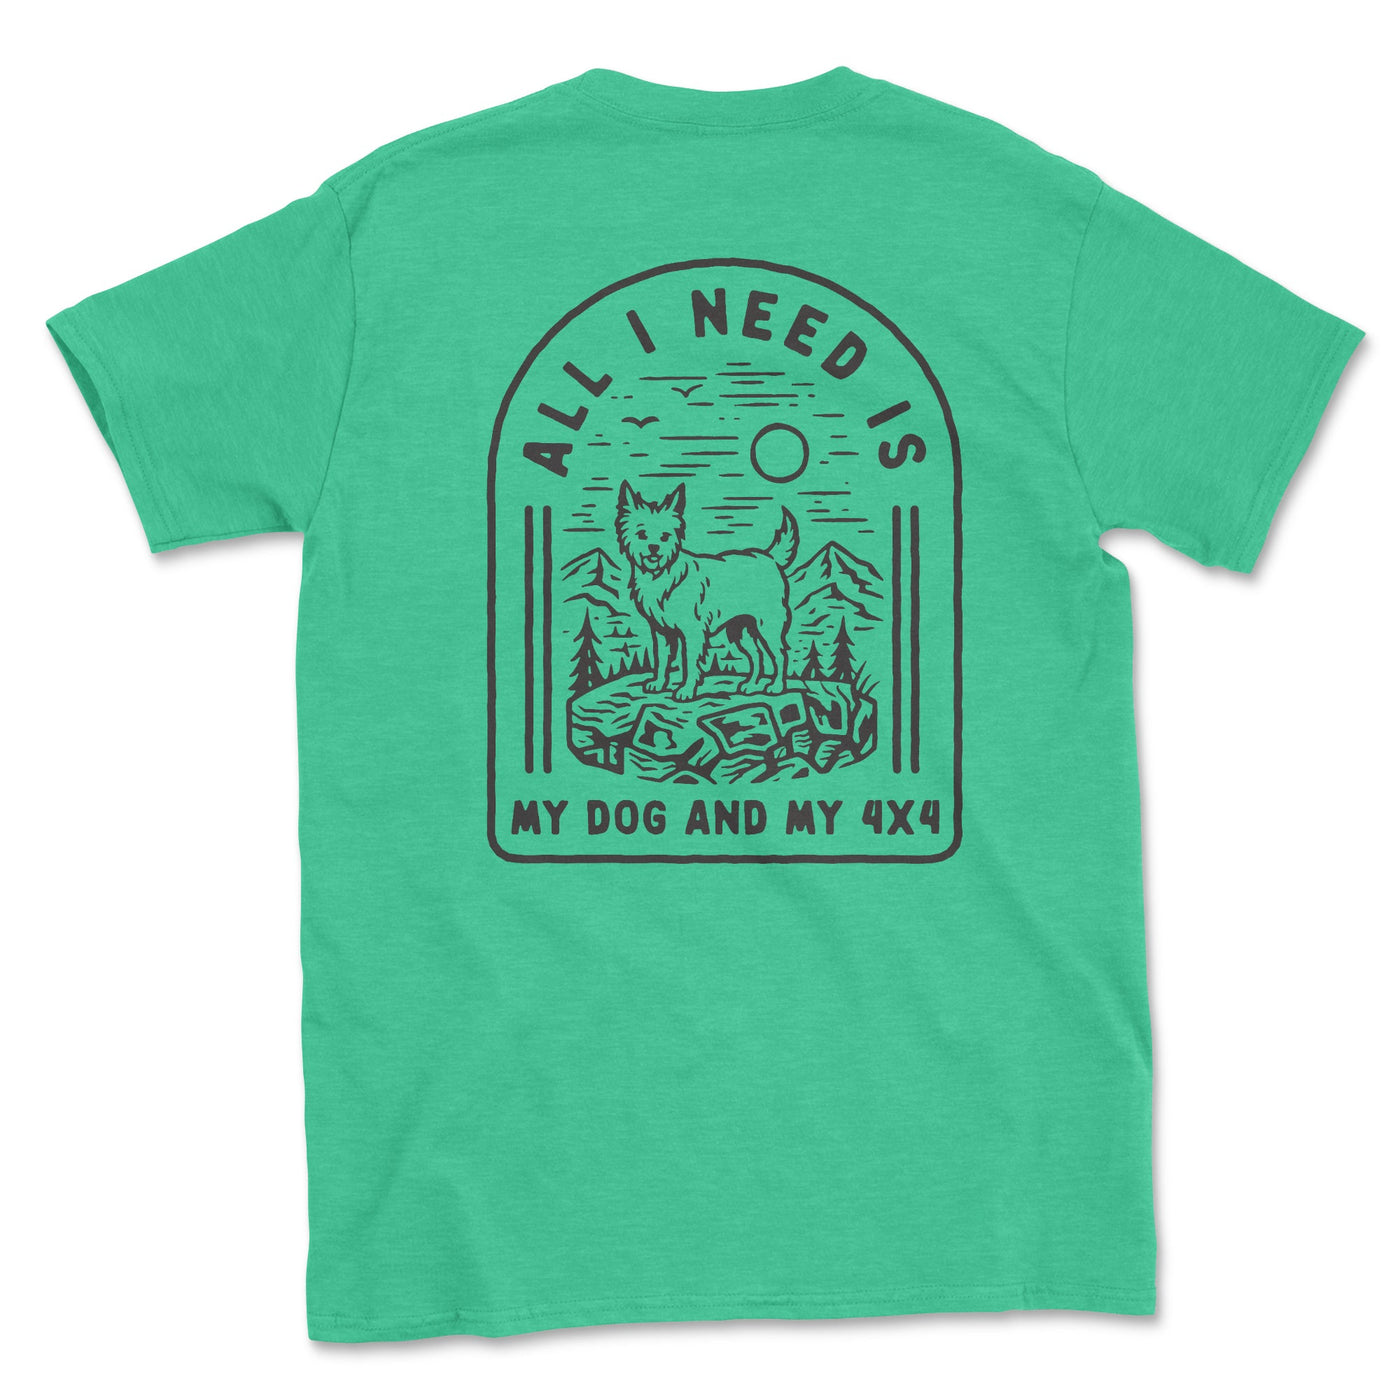 Who Let the Dogs Out-Offroad 4x4 Tee Shirt - Goats Trail Off-Road Apparel Company